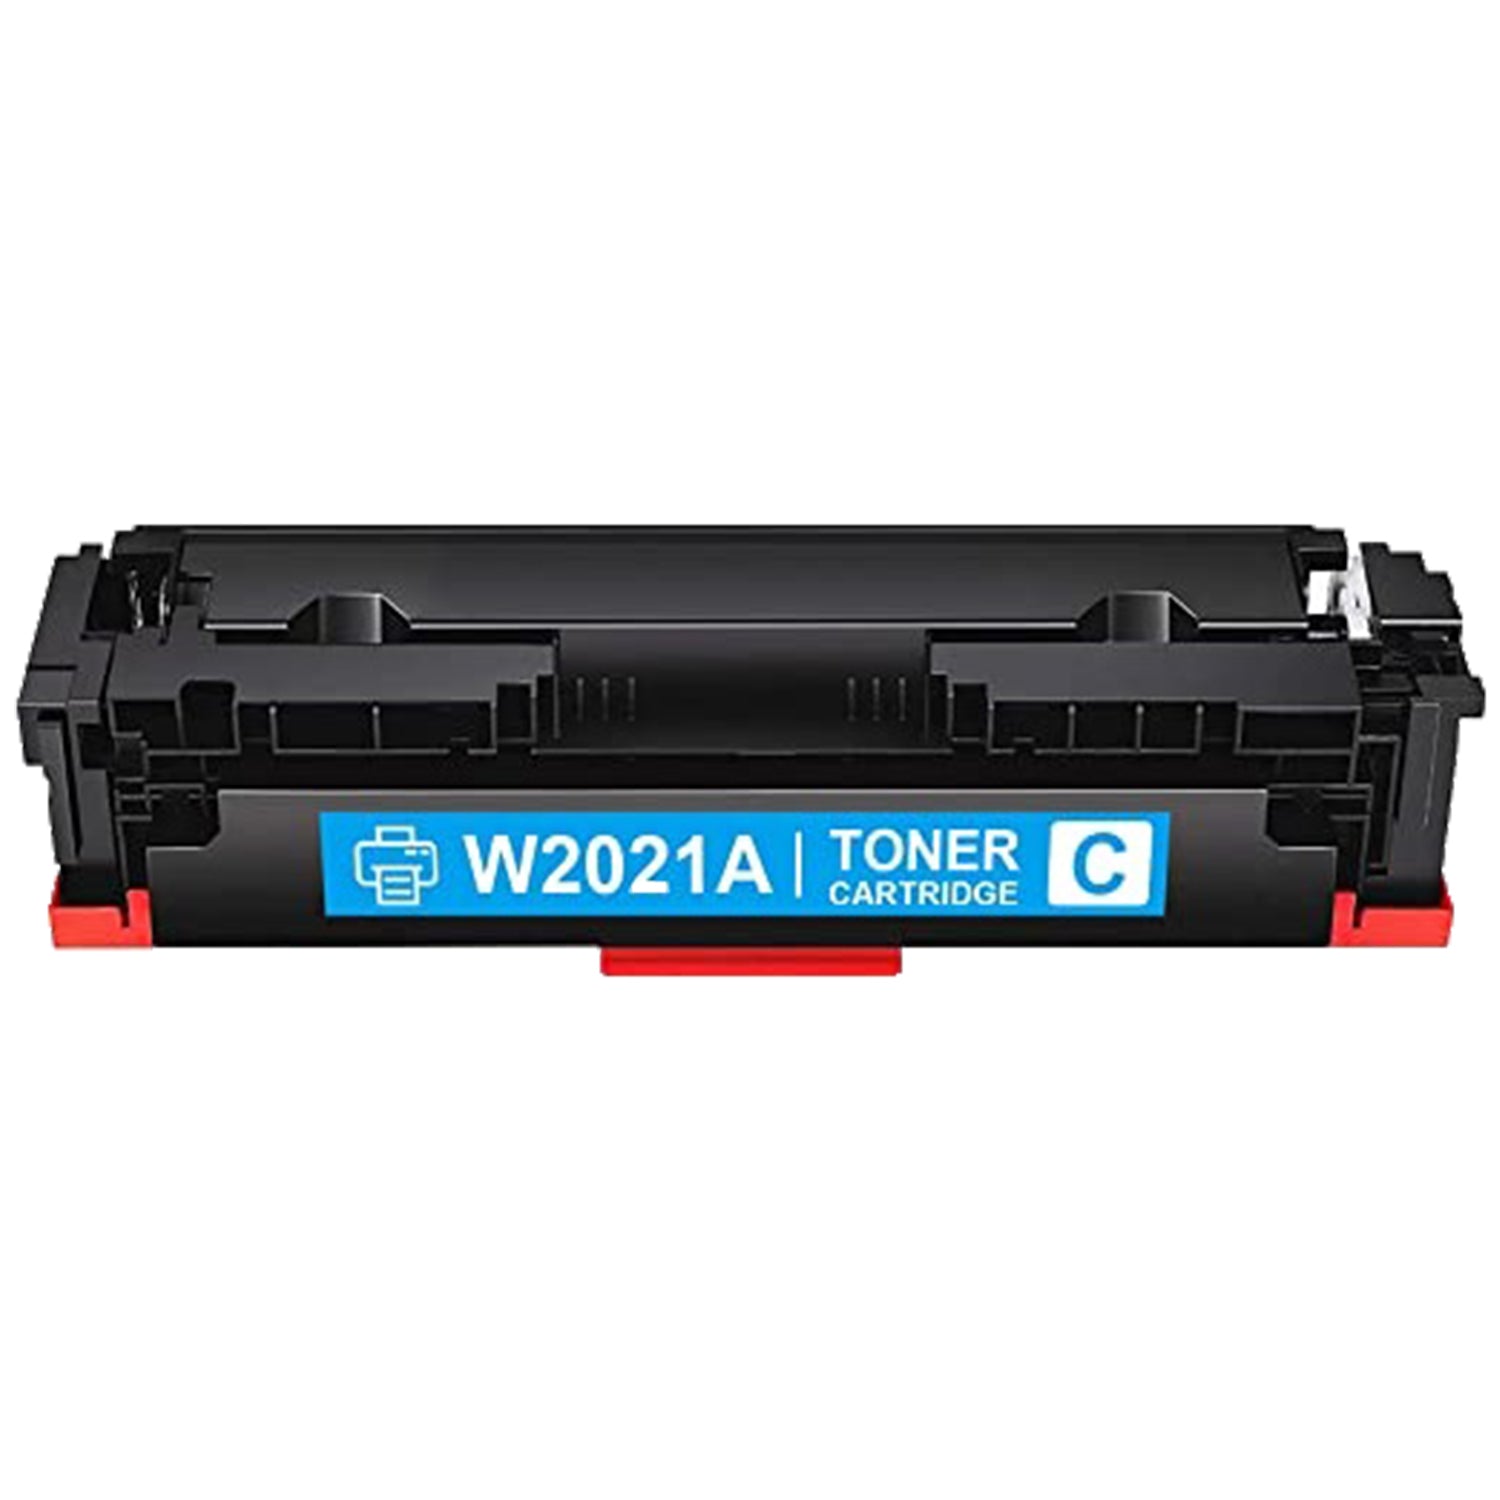 Absolute Toner Compatible HP W2021A / 414A Cyan Laserjet Toner (With Chip) By Absolute Toner HP Toner Cartridges